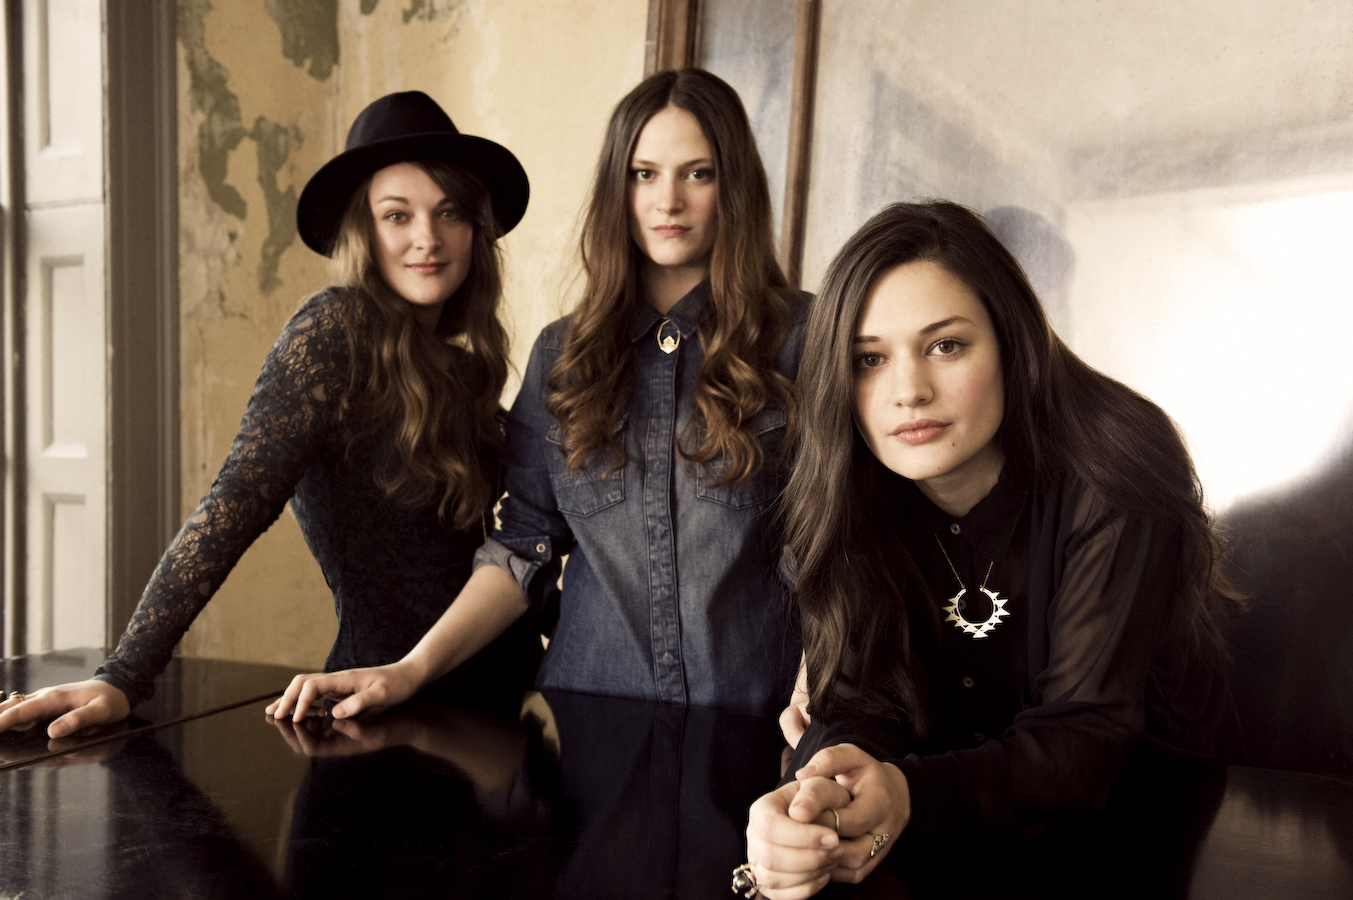 Трио сестер. The staves Band. The staves & YMUSIC - the way is read. Jessica Stavely Taylor. Сравнение фолк и фолктроника.